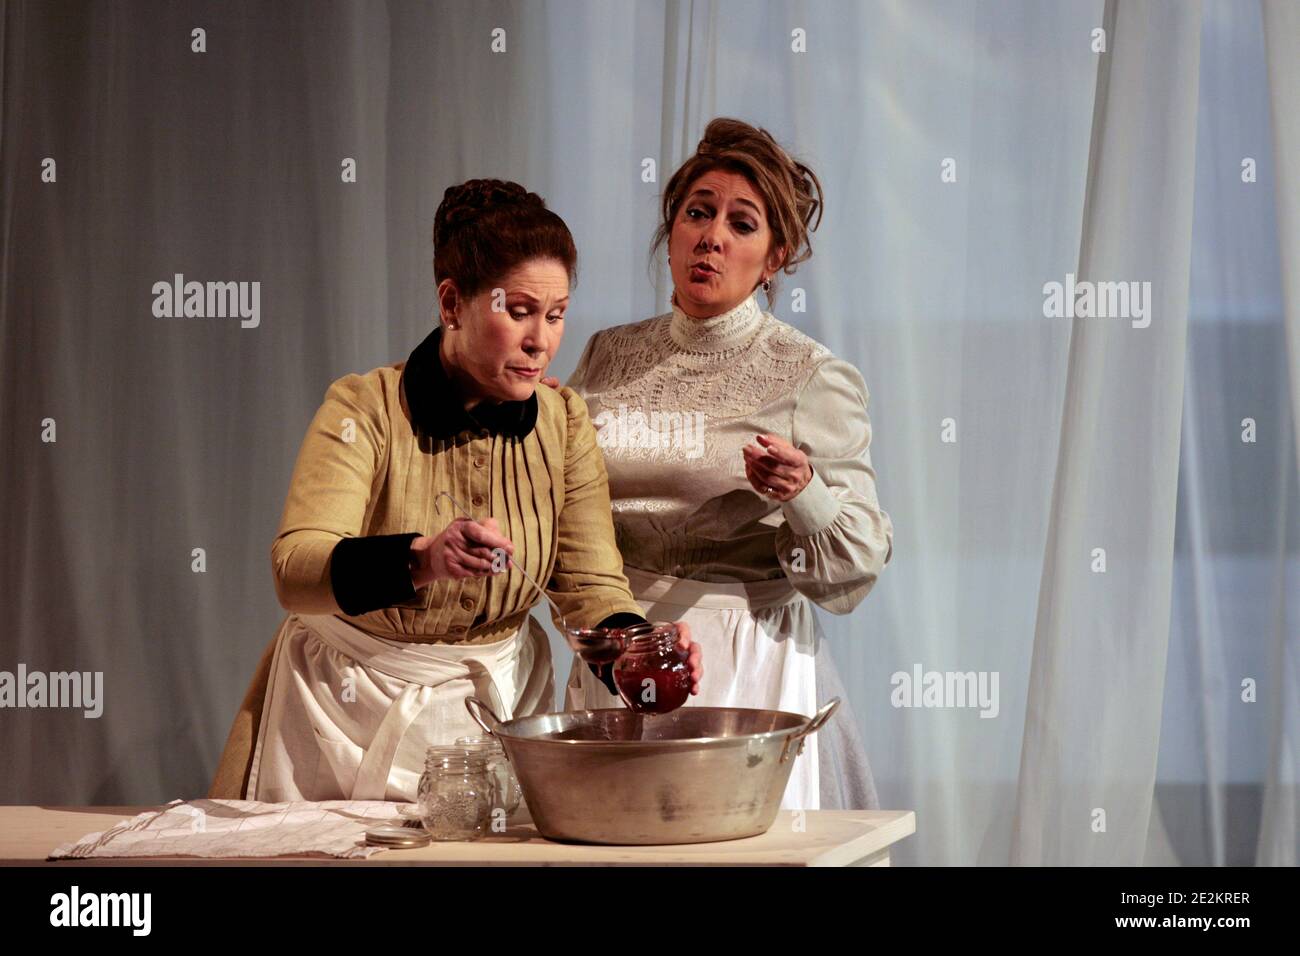 Private performance of Lille Opera's new production, 'Eugene Onegin' of Russian composer Tchaikovski, in Lille, northern France on January 7, 2010. Tchaikovsky's masterpiece was staged by director Jean-Yves Ruf and directed by Pascal Verrot at the head of Stock Photo